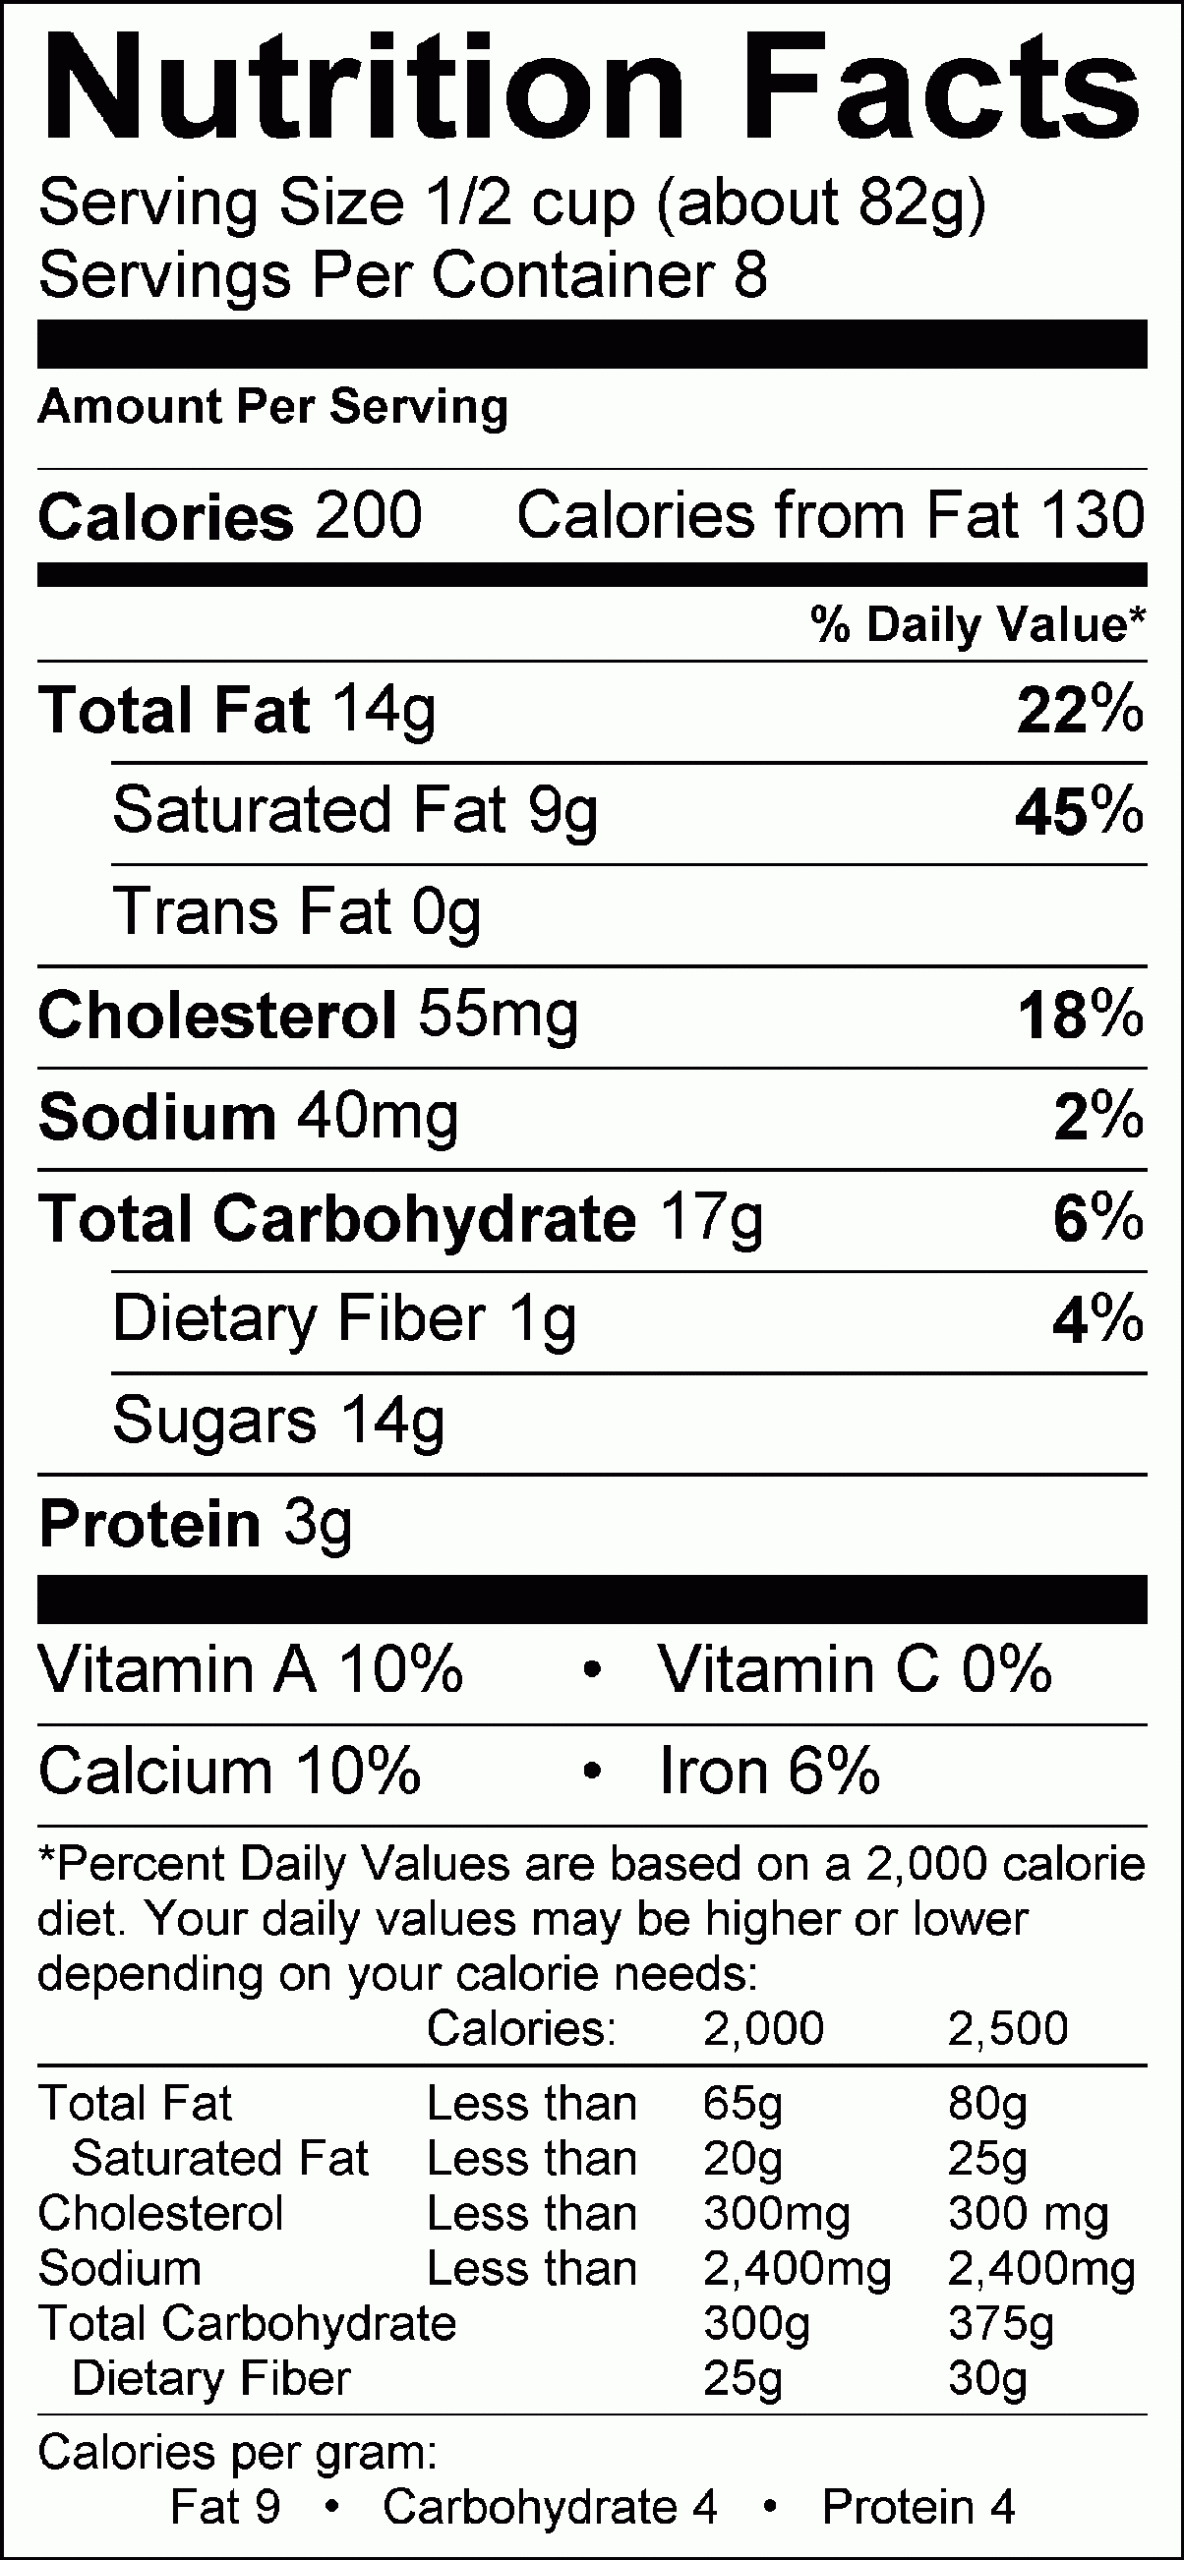 Nutrition Facts Table Using Html & Css – Codemyui With Regard To Nutrition Label Template Word